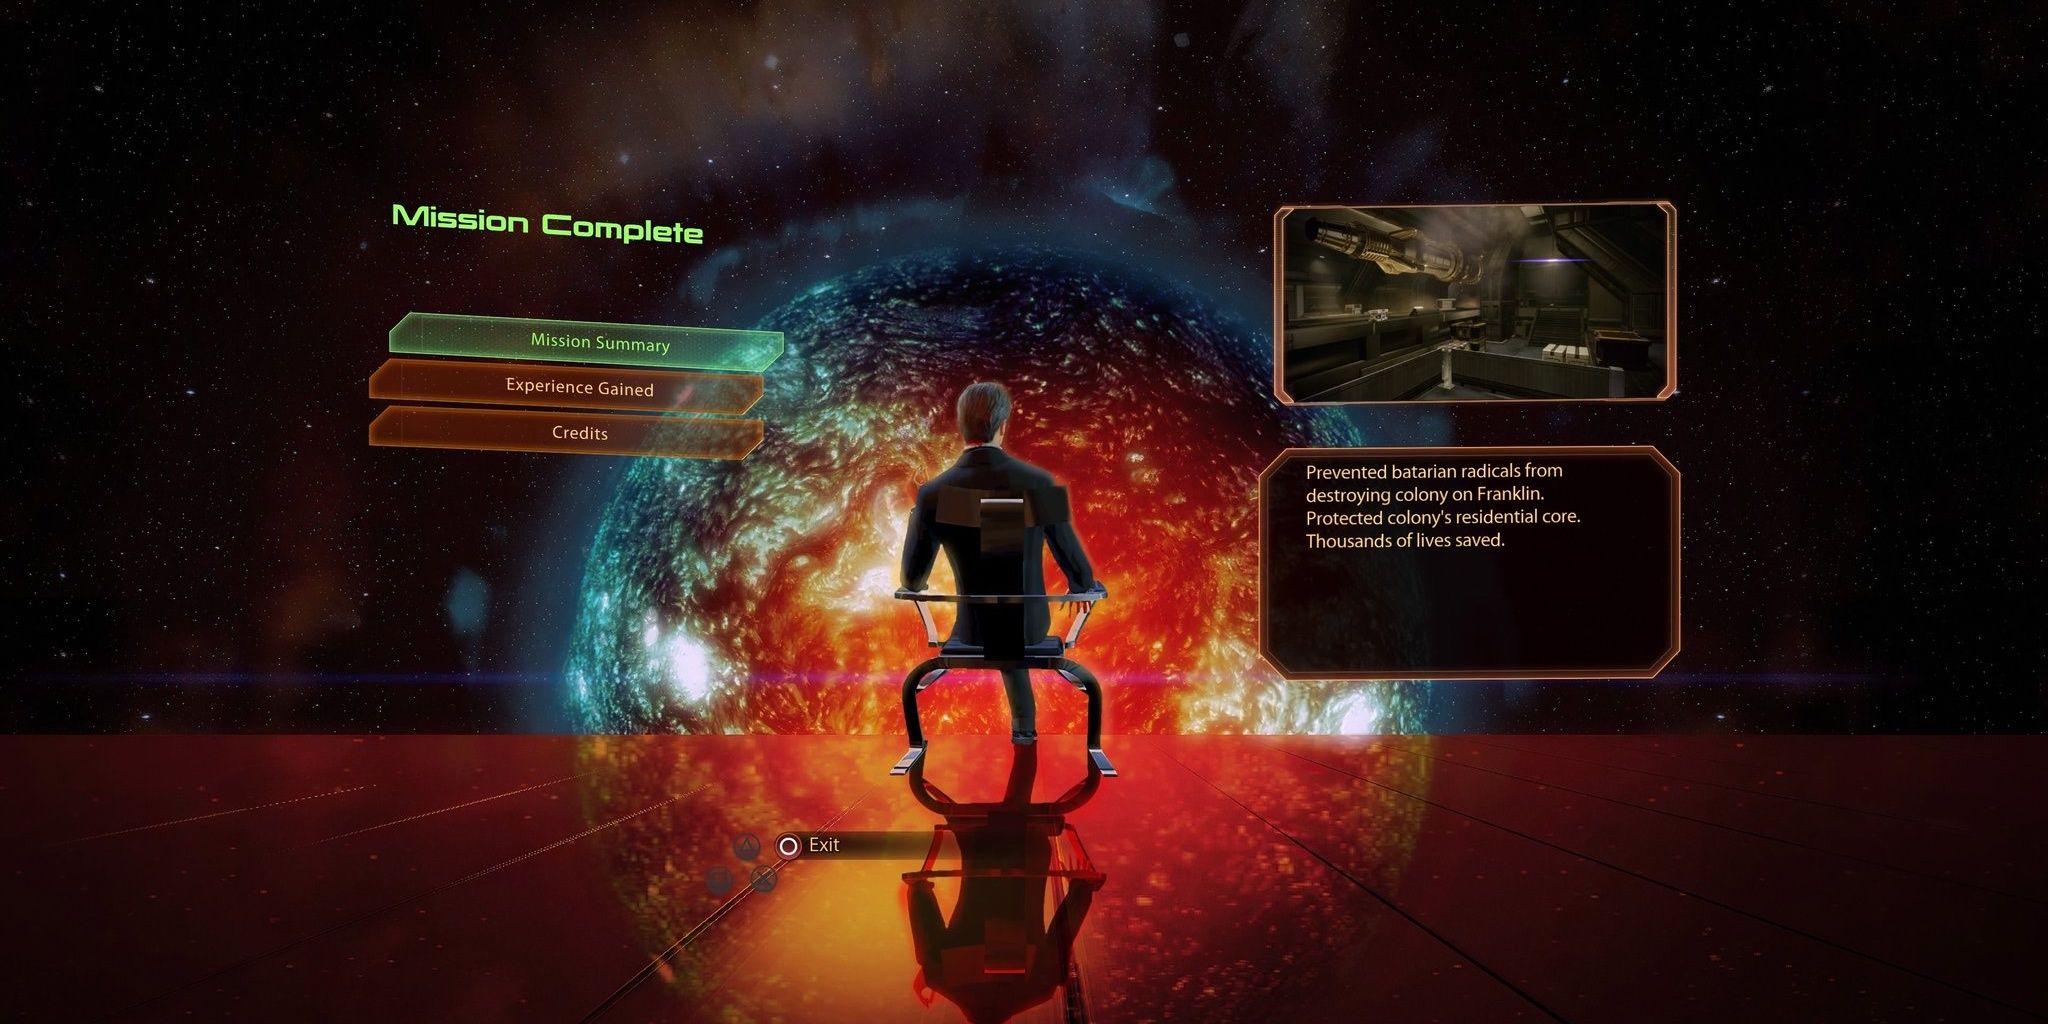 mass effect 2 remove shared cooldown